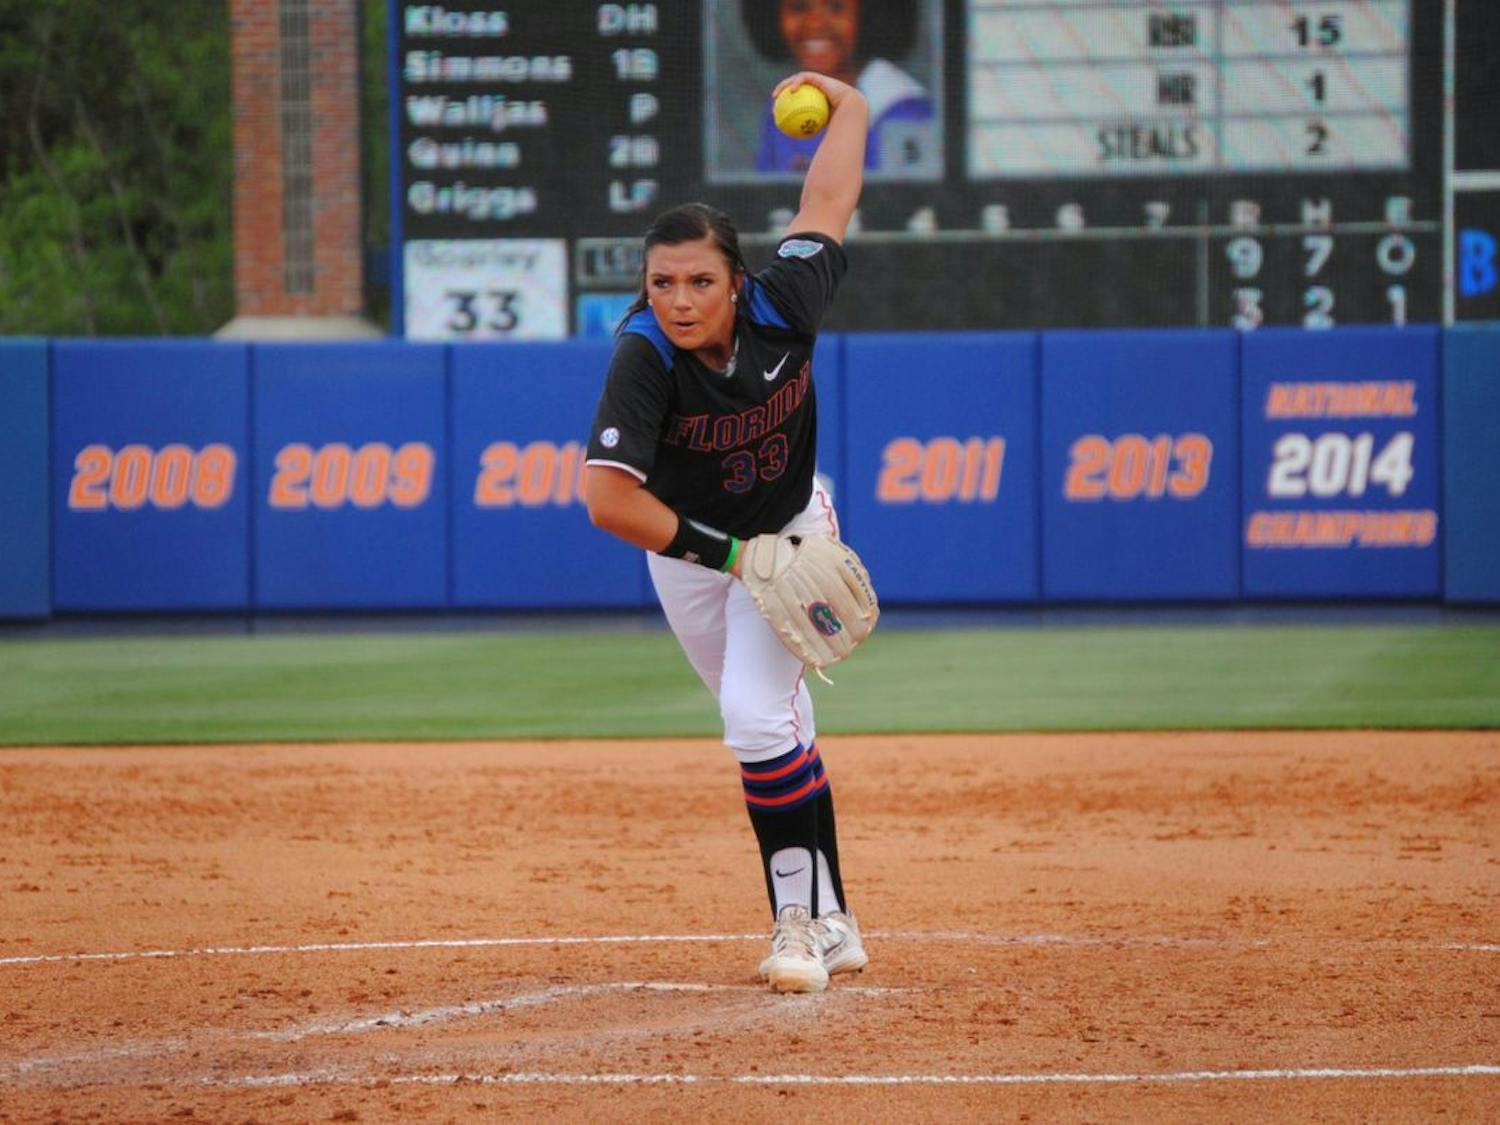 Delanie Gourley pitchers during Florida's 14-10 loss to LSU on March 14, 2015, at Katie Seashole Pressly Stadium.